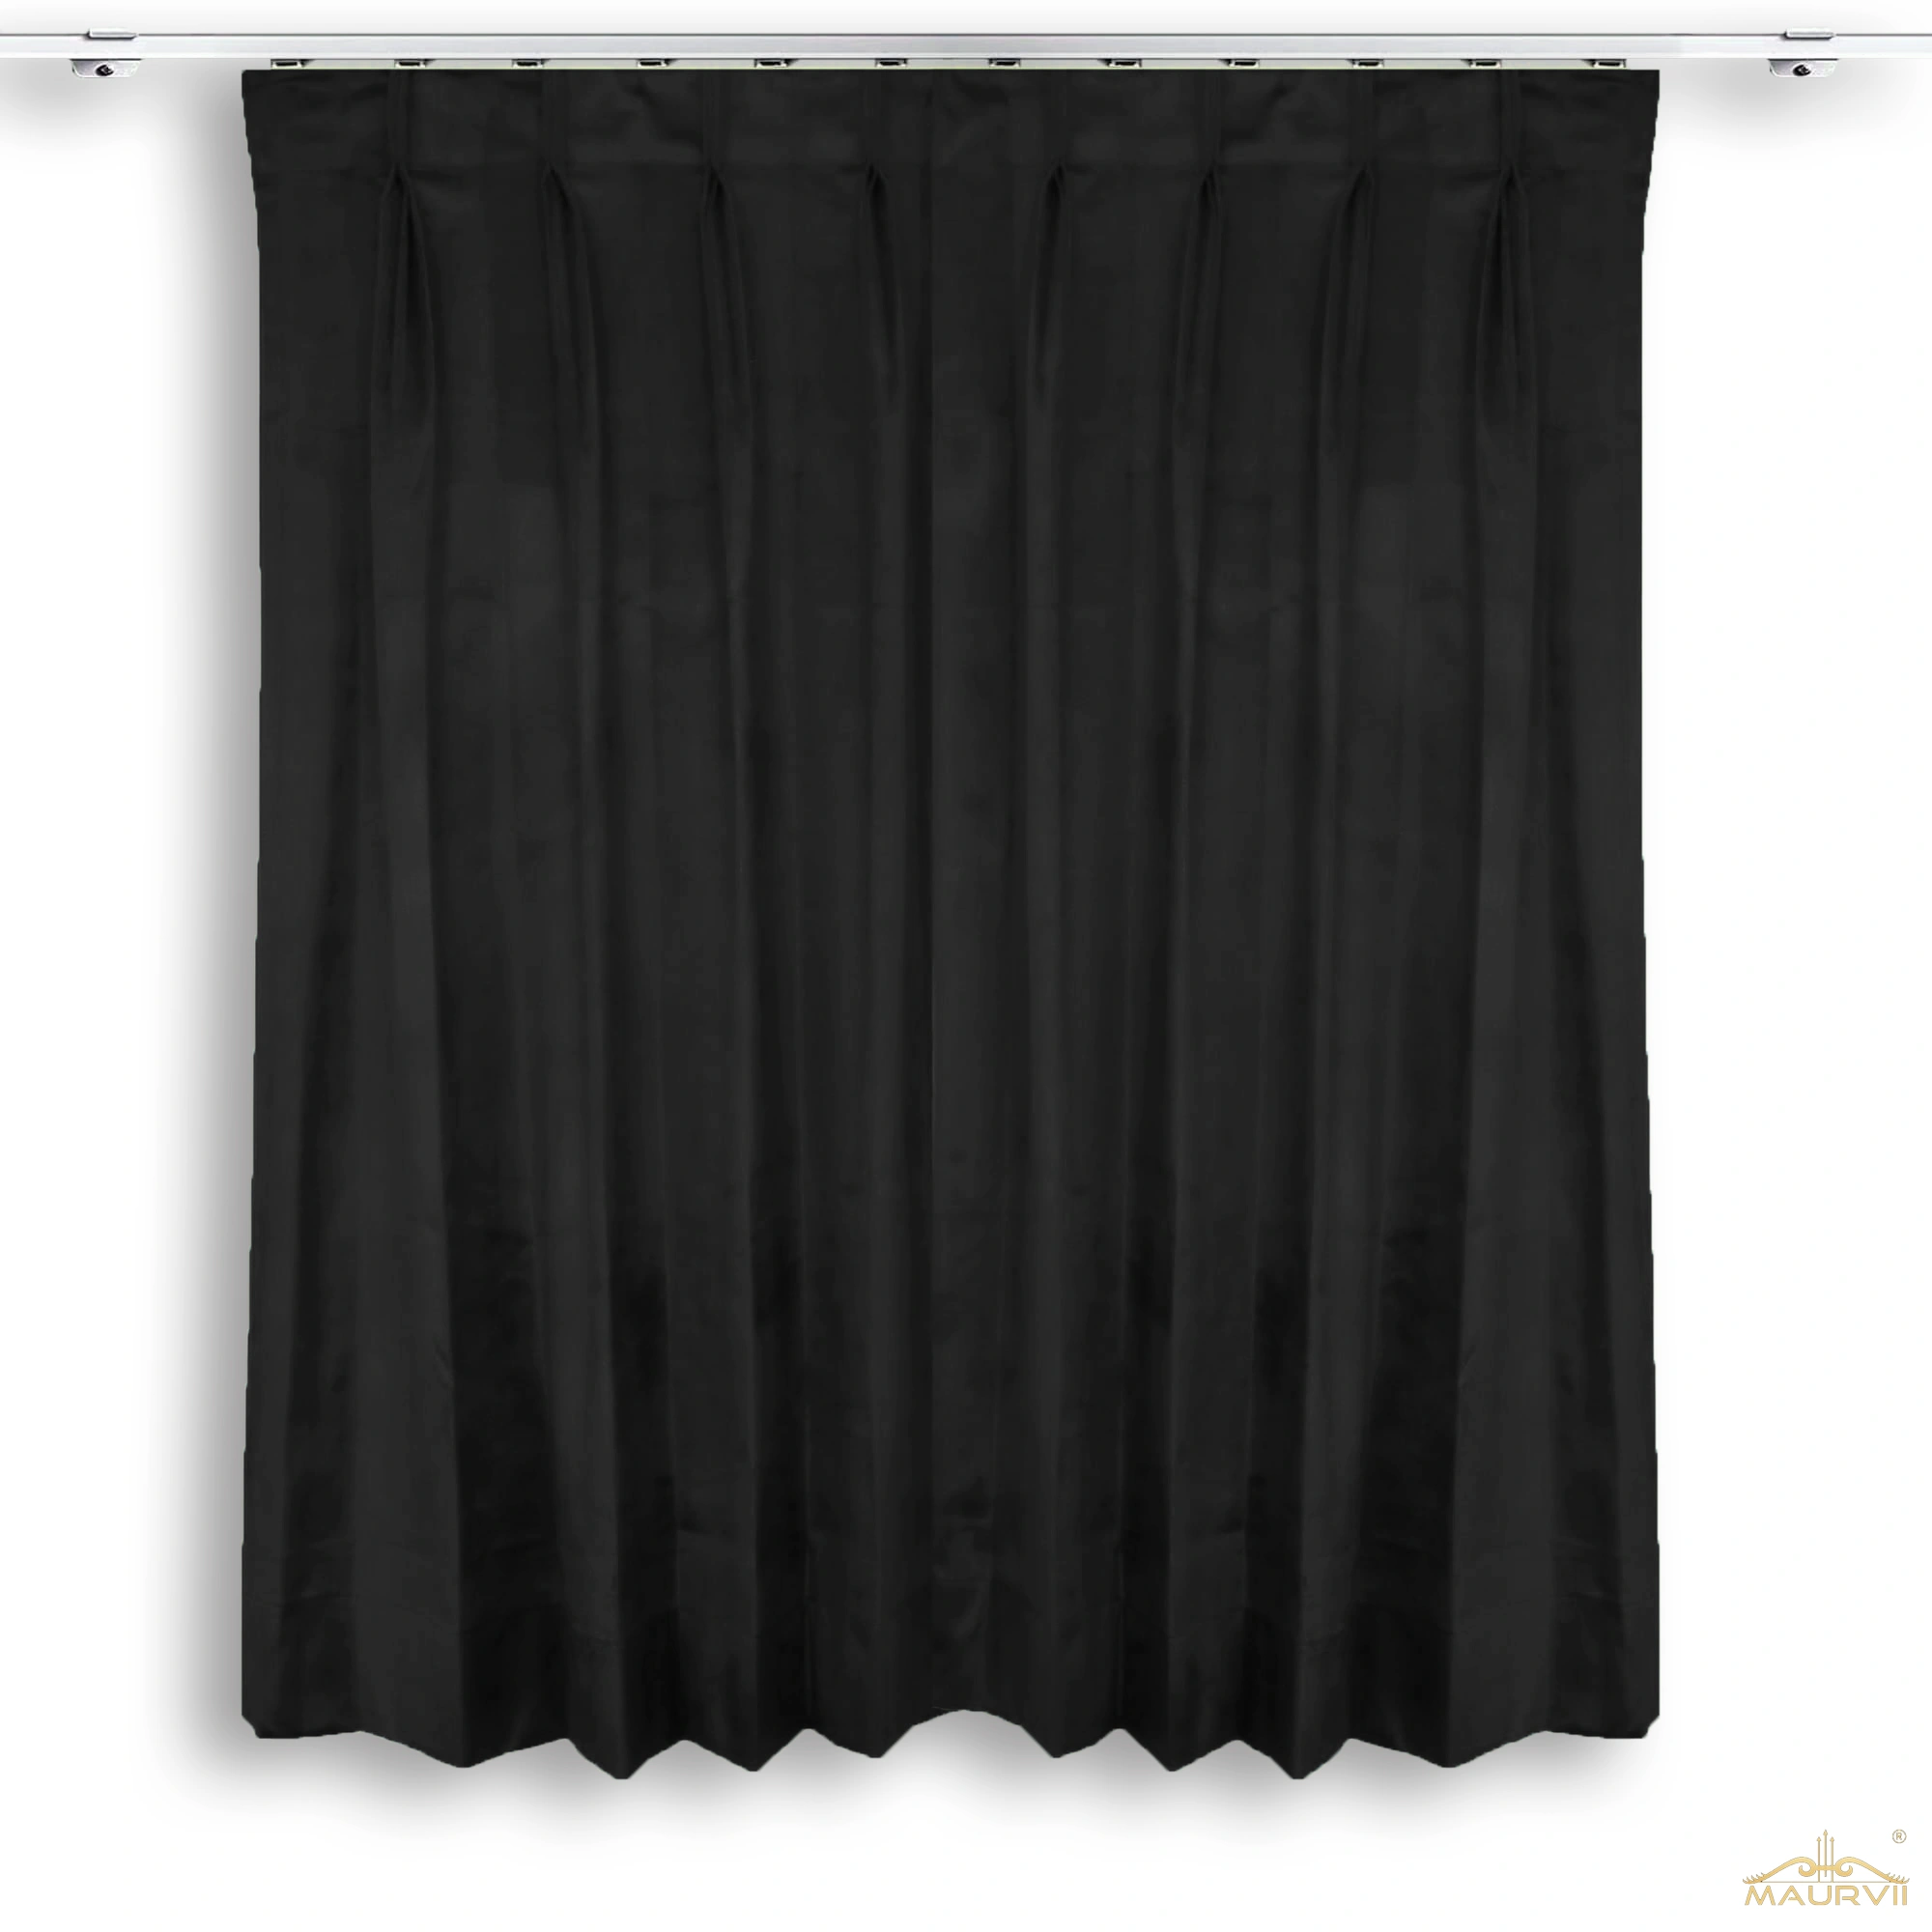 Double pleated velvet stage curtains in black color